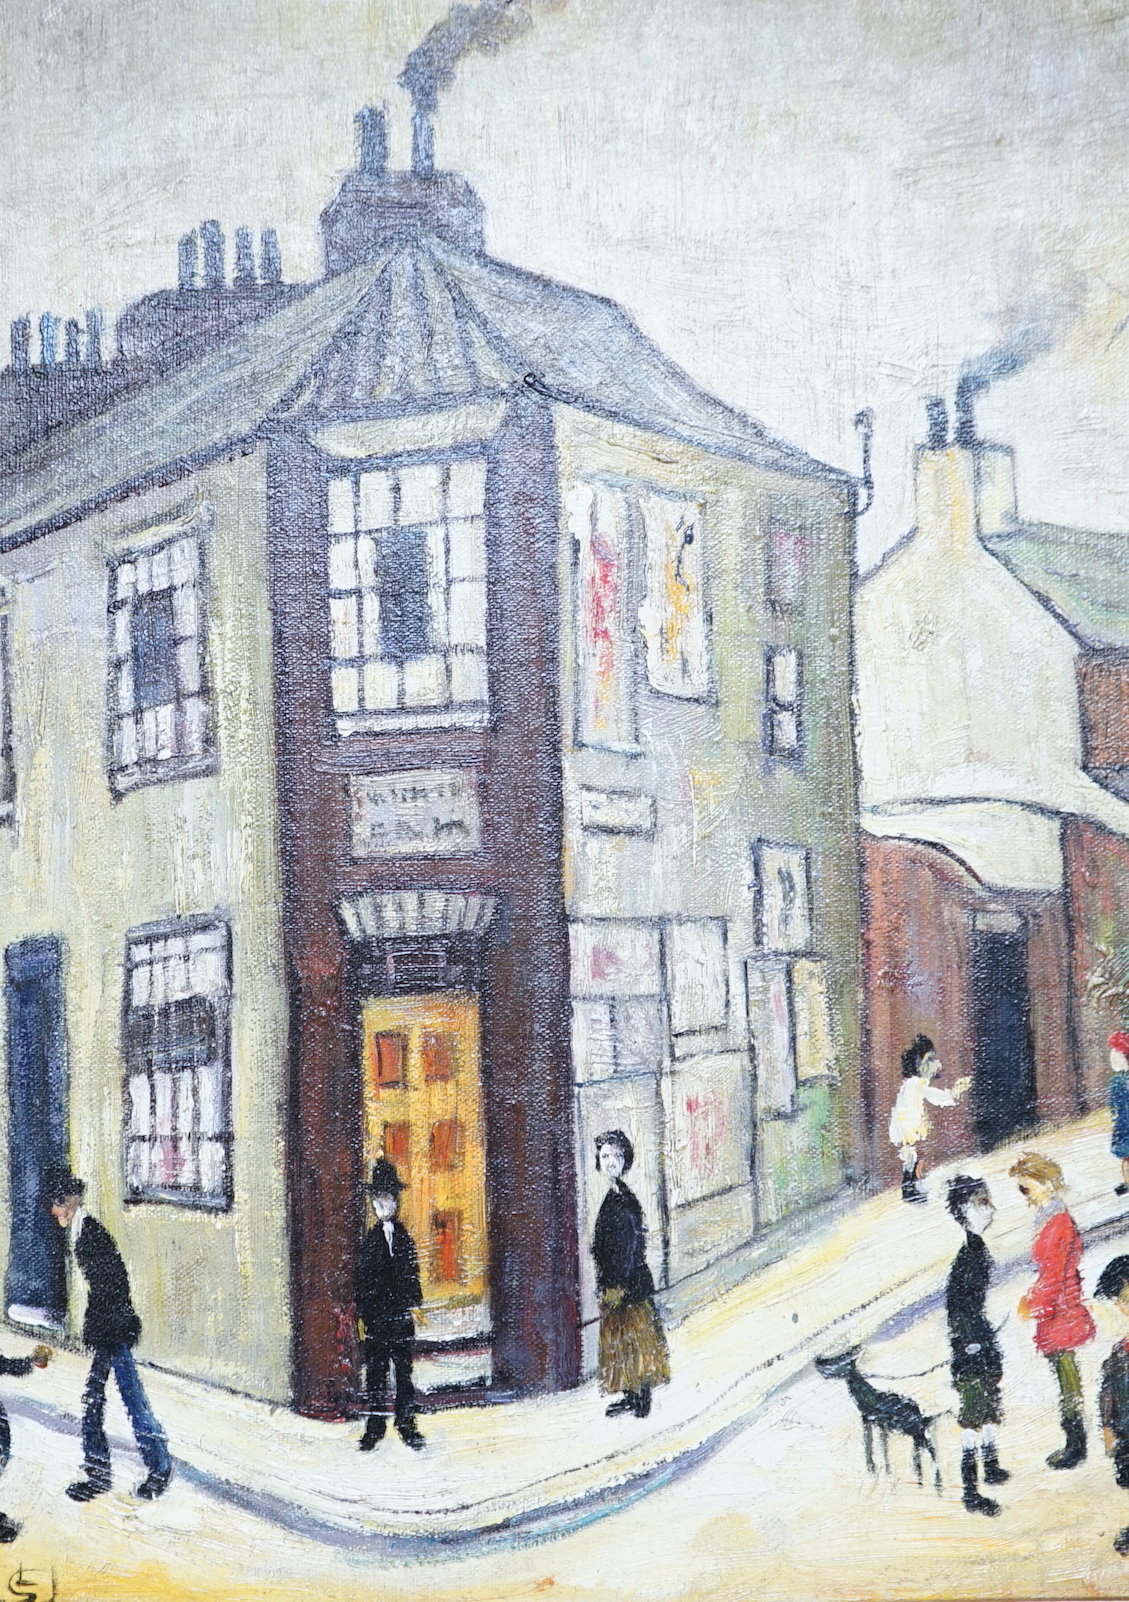 Manner of Laurence Stephen Lowry RBA RA (1887-1976) oil on board, Northern street scene with figures, 41 x 30cm, ornate gilt framed                                                                                         